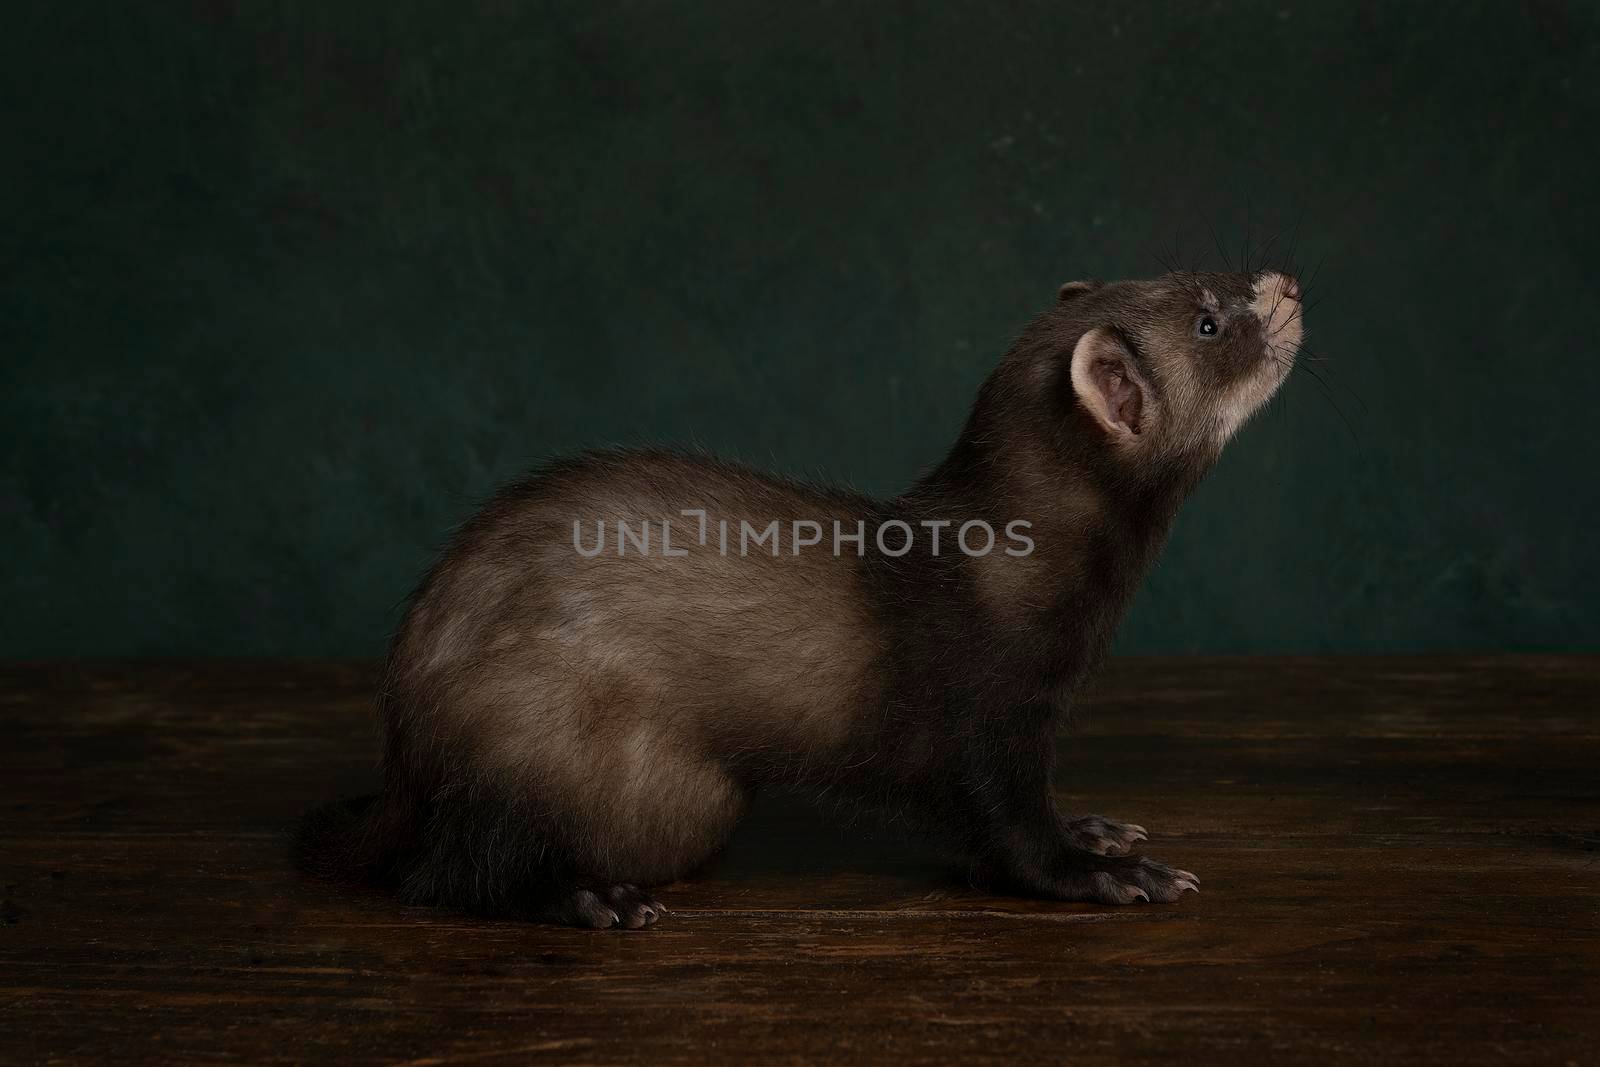 Young ferret or polecat puppy full body in a stillife scene looking up against a green background